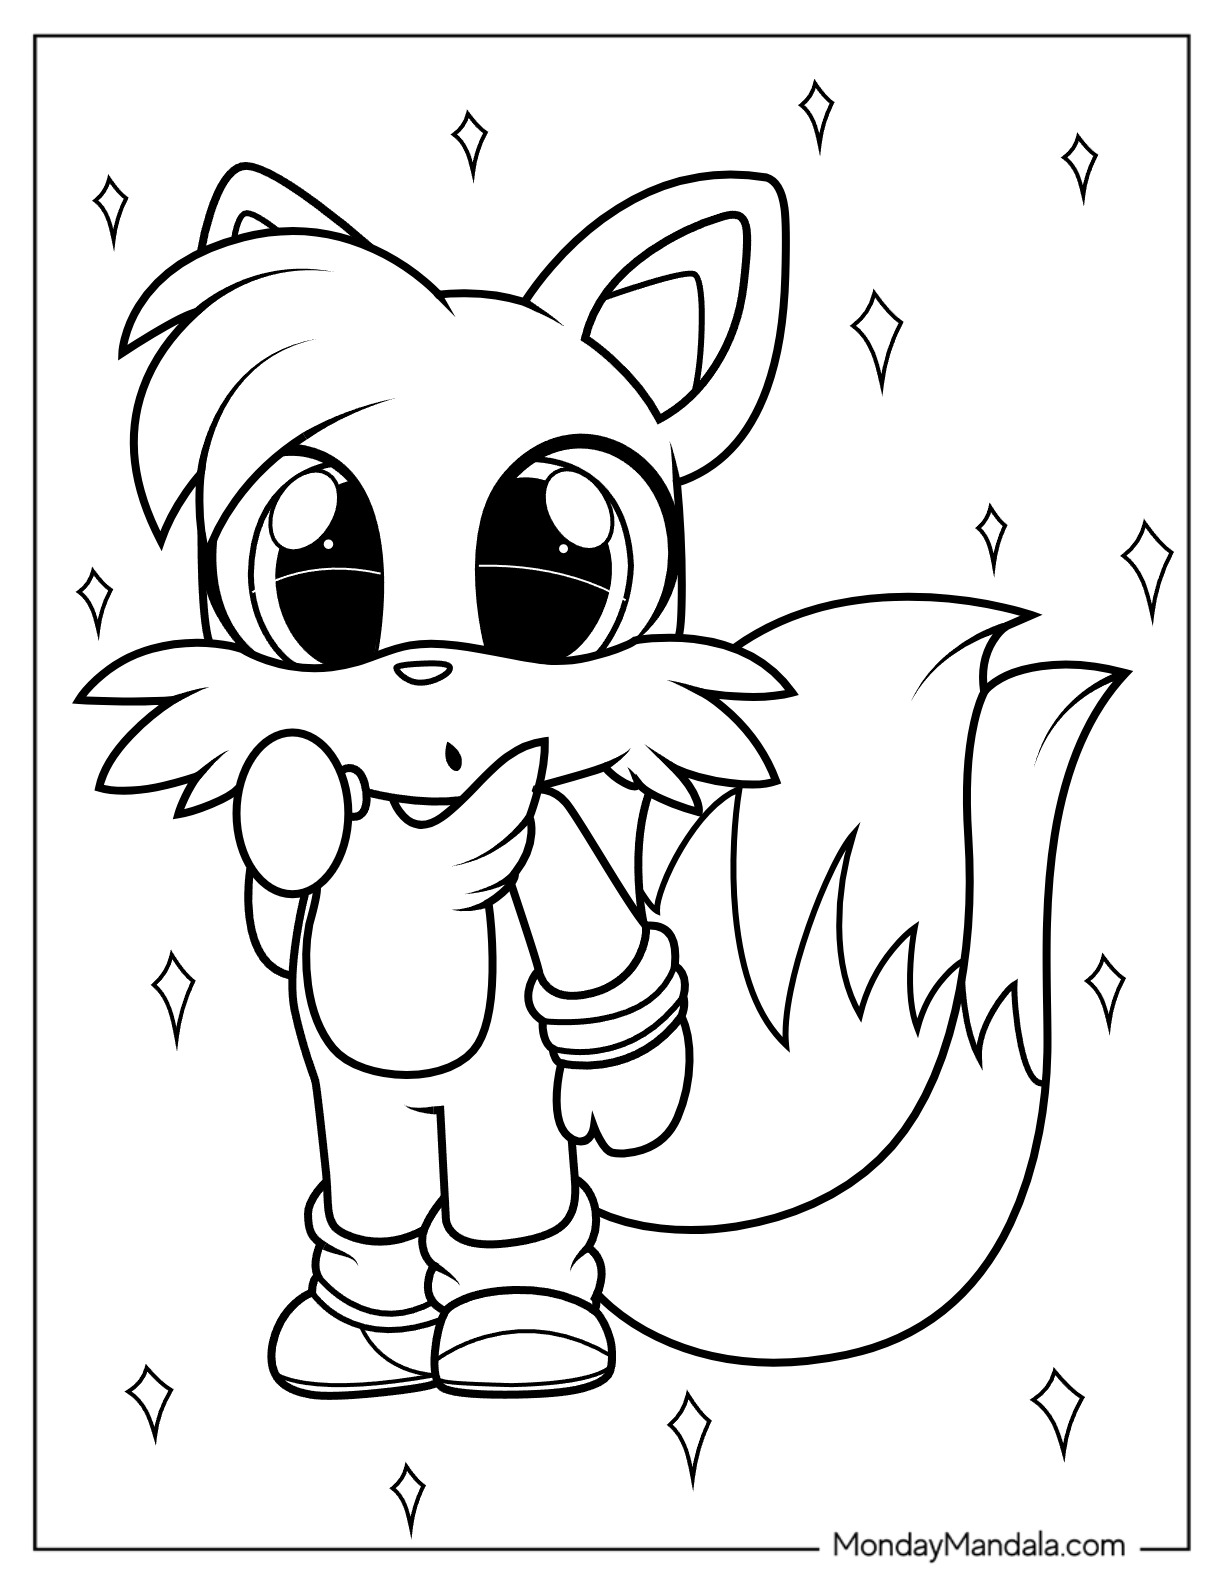 Tails coloring pages free pdf printables